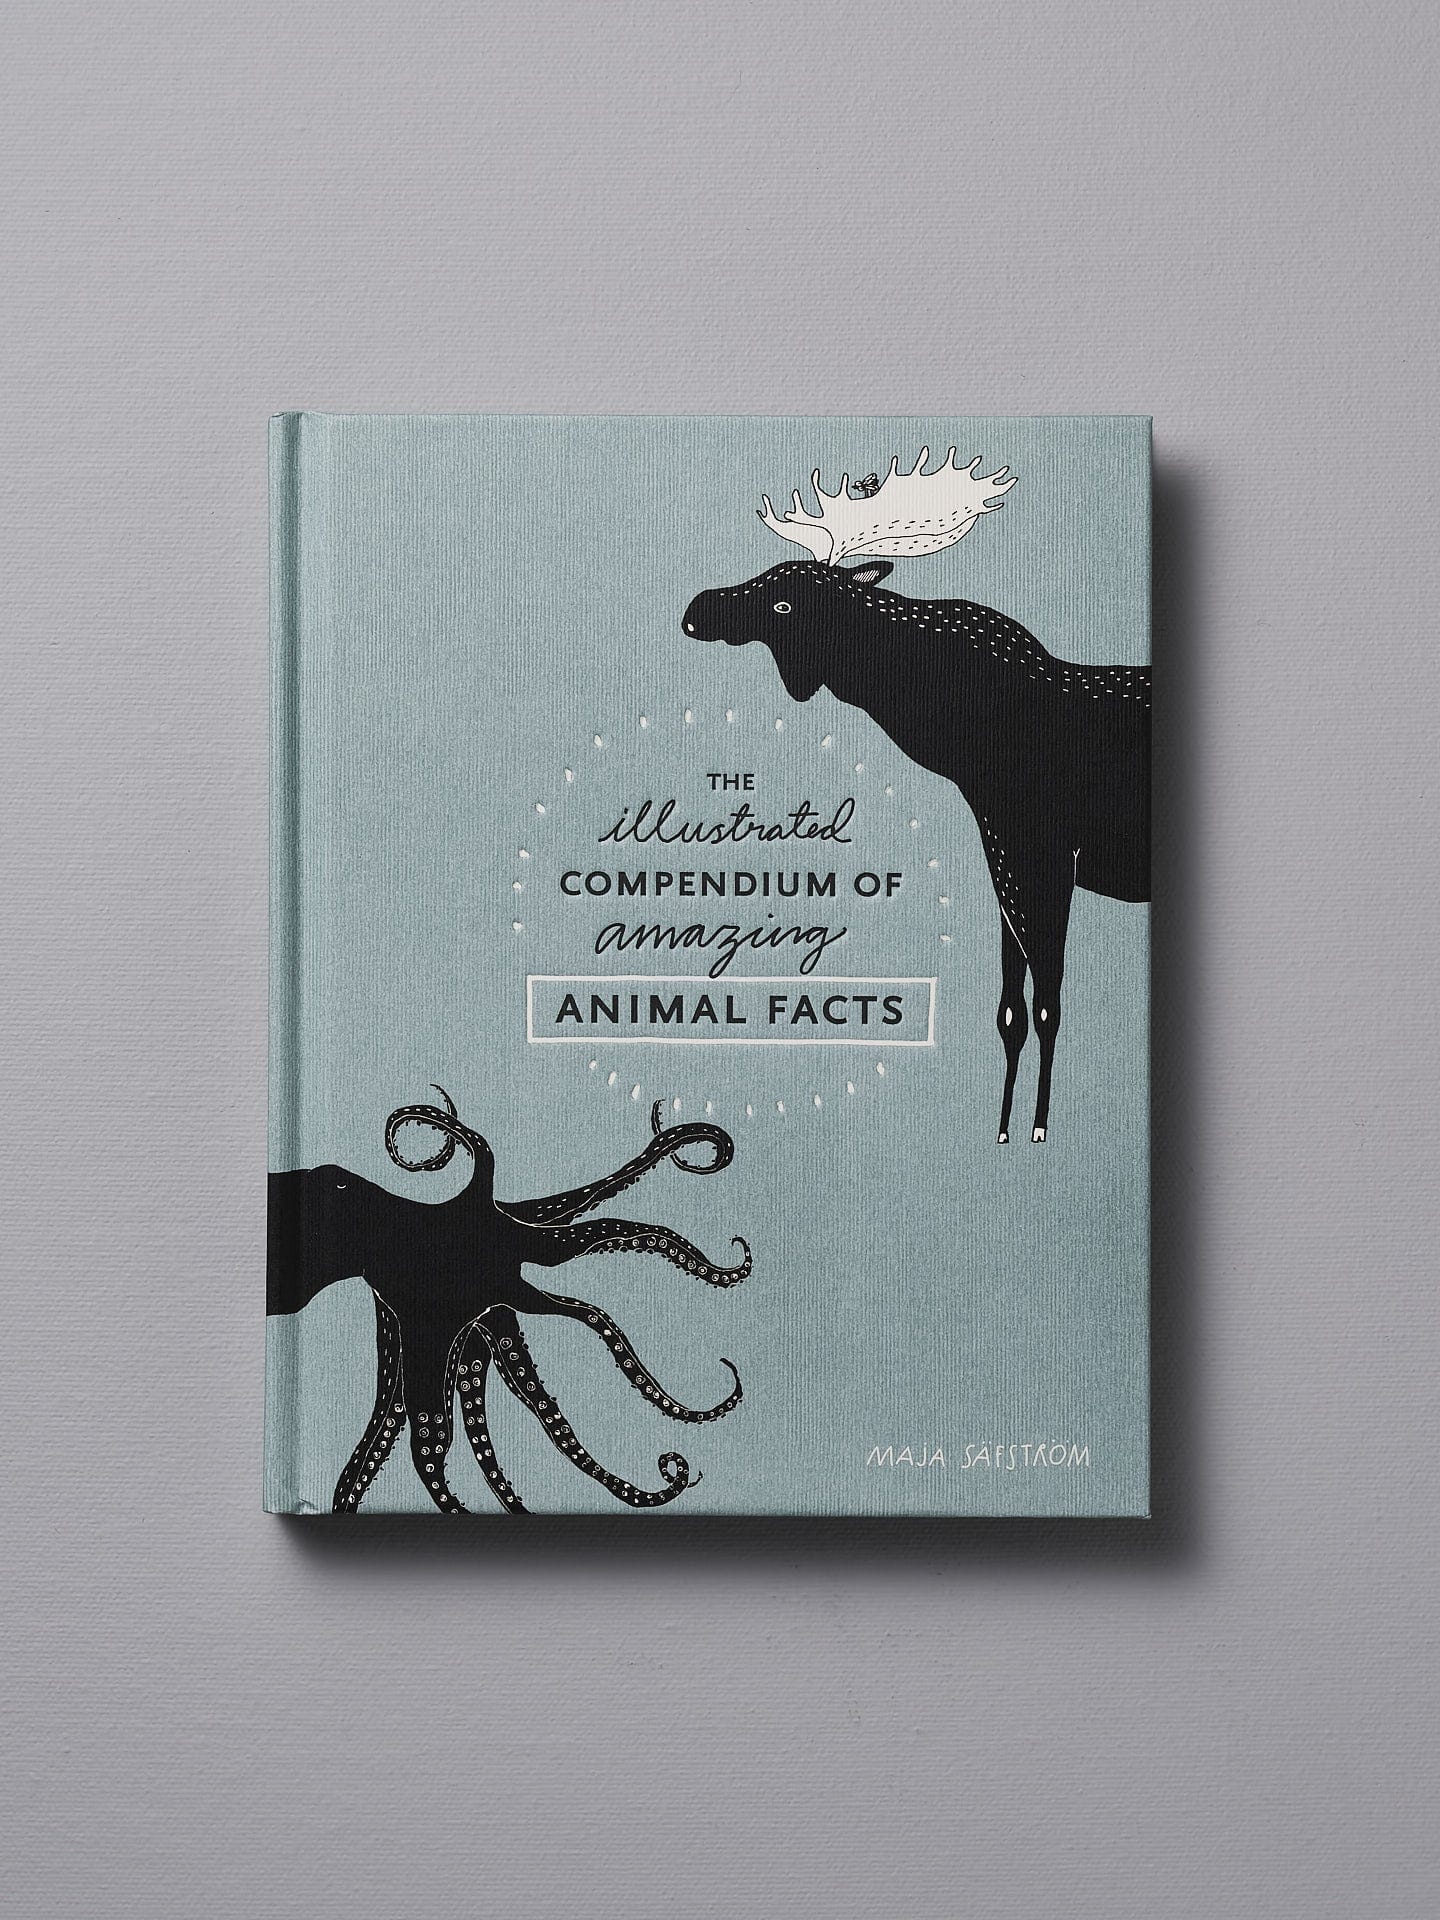 A book with The Illustrated Compendium of Amazing Animal Facts by Maja Säfström and an octopus.